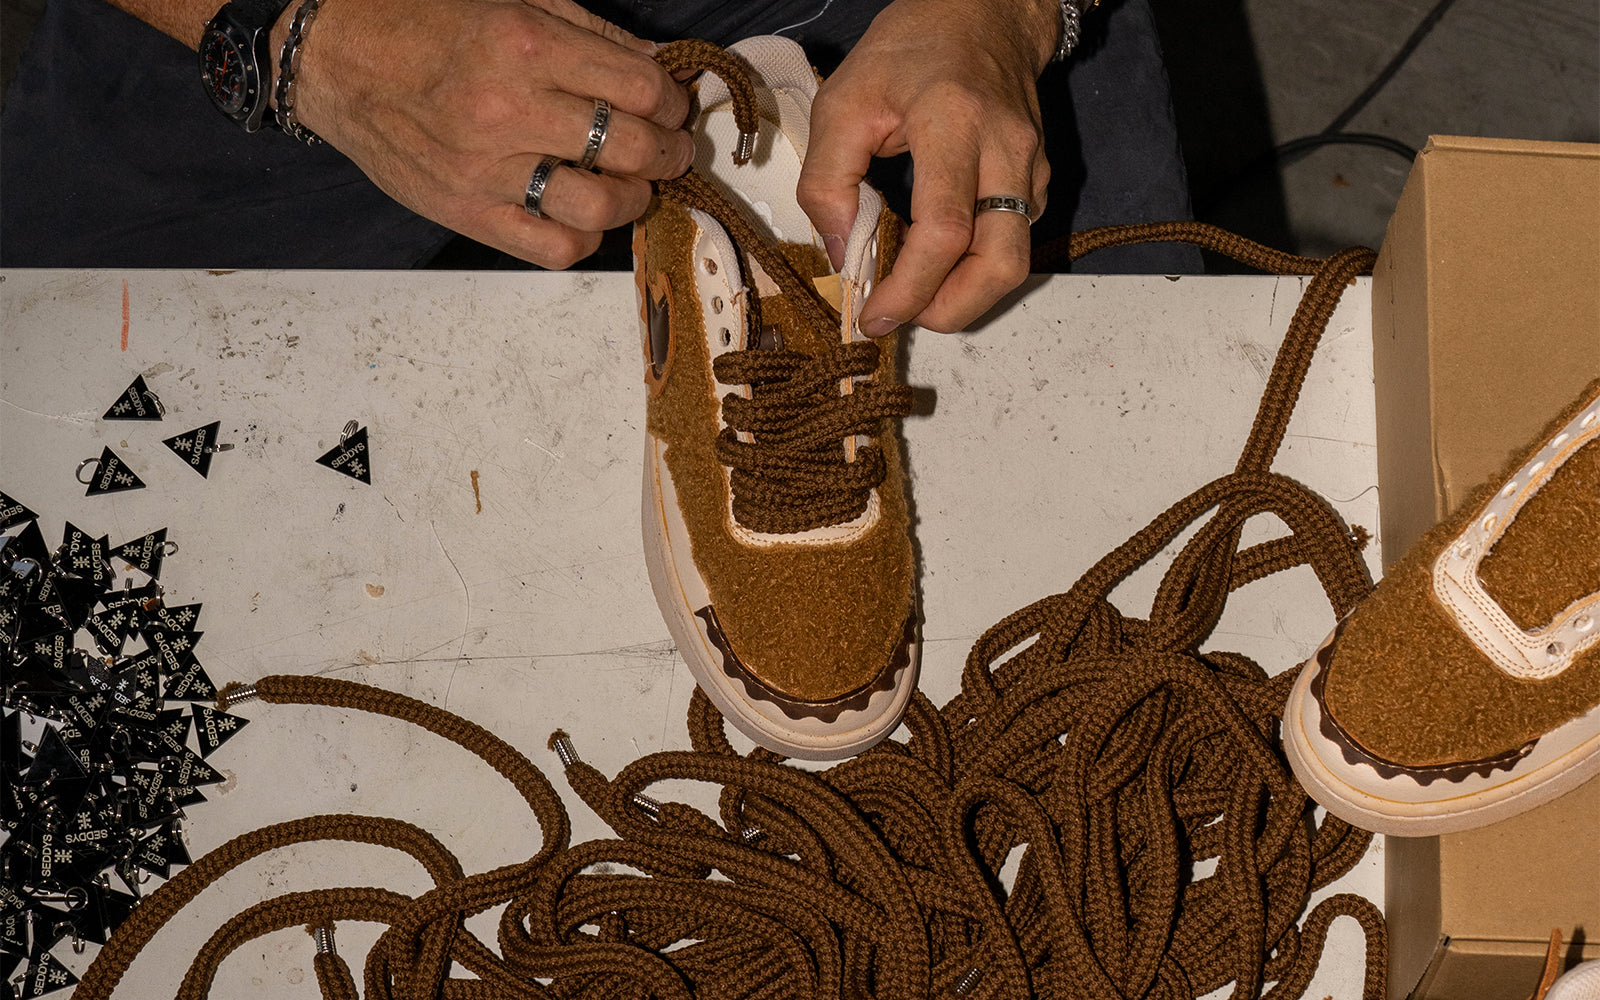 Quality control and addition of shoe laces